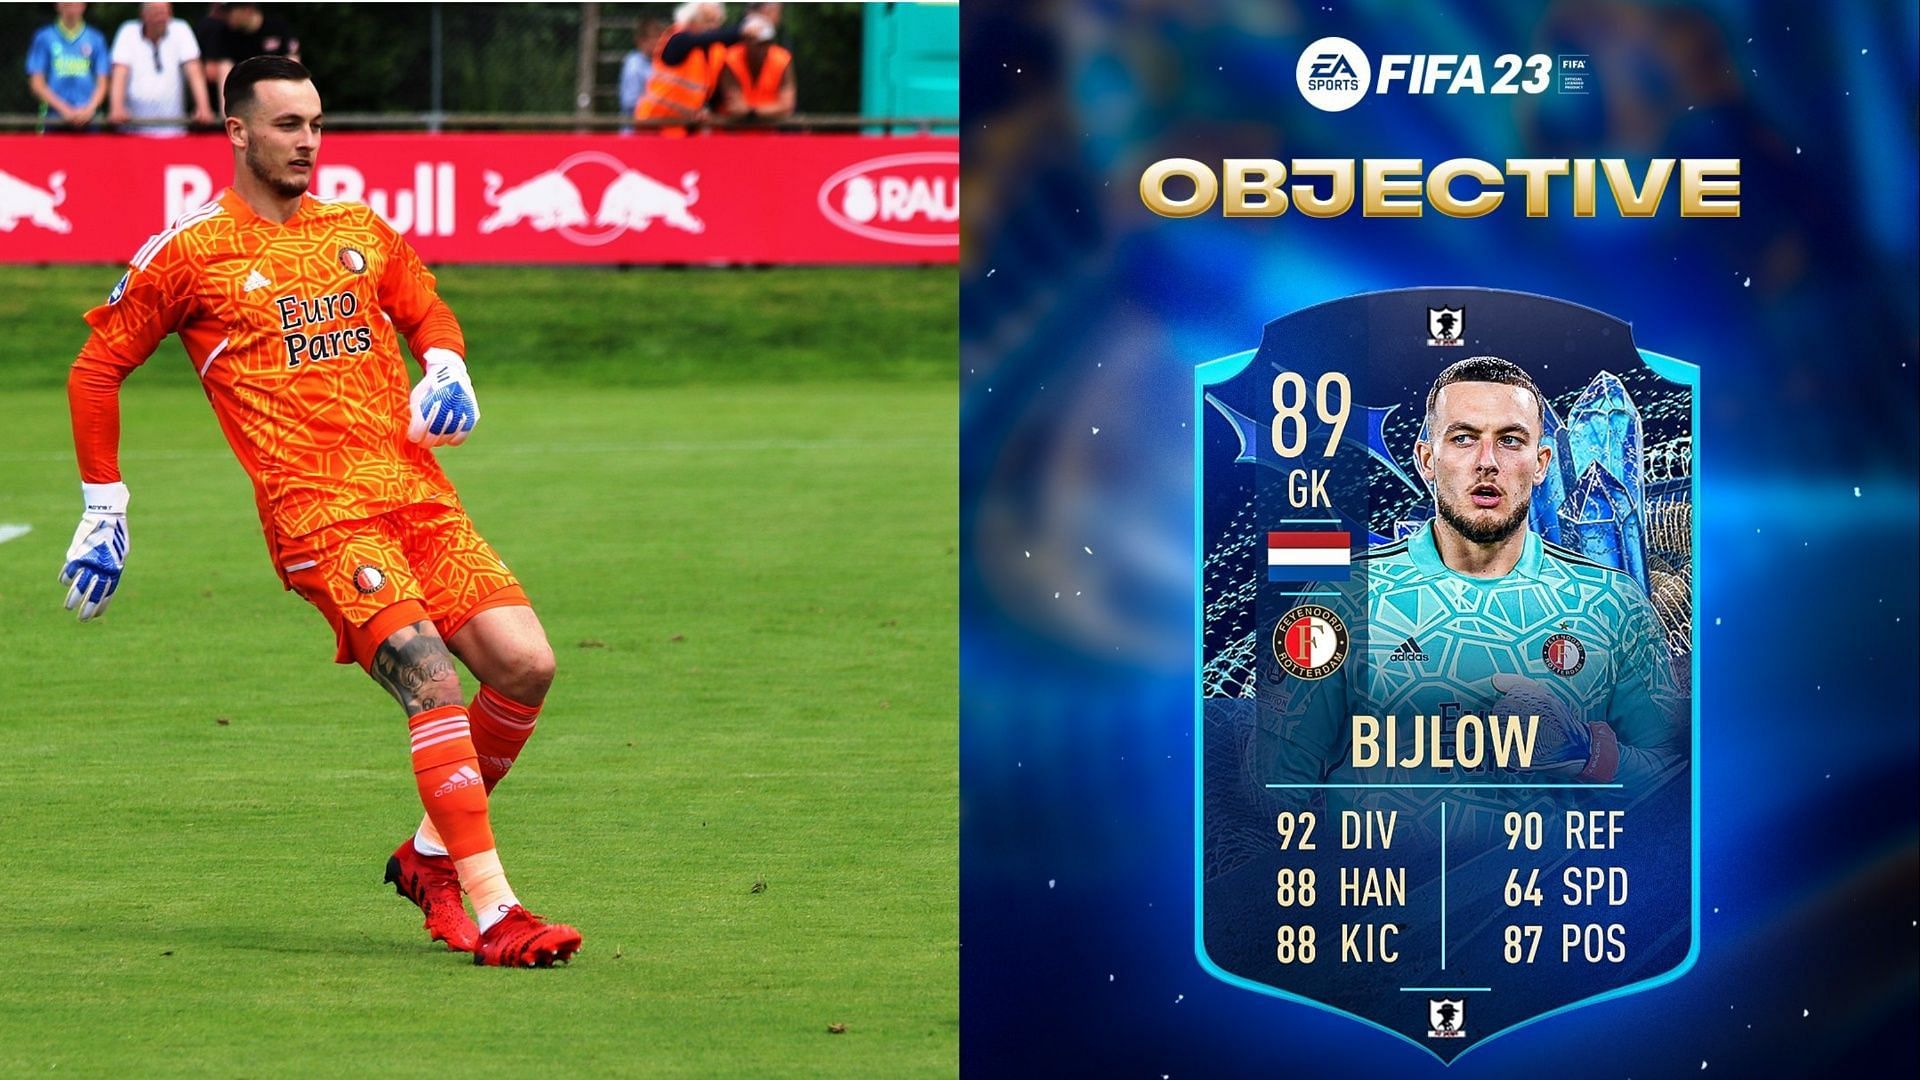 The Justin Bijlow, Community TOTS card could become a bargain for FIFA 23 players (Images via Getty/ Twitter/FUT Sheriff)